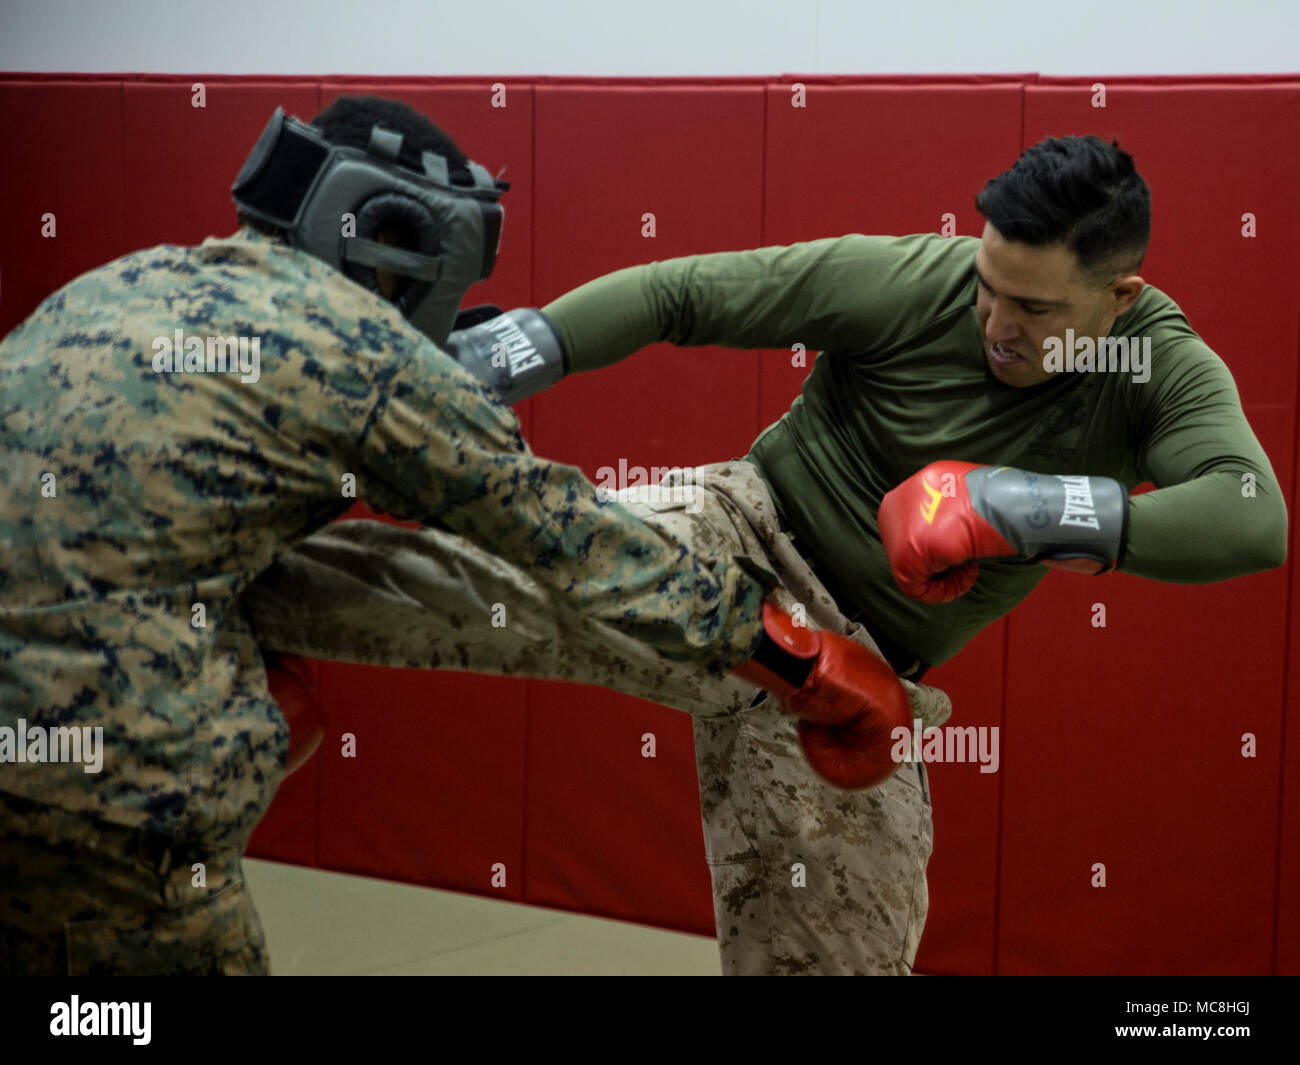 Lance Cpl. Vincent A. Morton spars with martial arts instructor, Sgt. Skylar Voegele, during a black belt course on Camp Foster, Okinawa, Japan, March 23, 2018. Marine Corps Martial Arts Program is an integrated, weapon-based system that incorporates the full spectrum of the force continuum on the battlefield, and contributes to the mental, character and physical development of Marines. Voegele is a martial arts instructor with 1st Marine Aircraft Wing. Morton is a tax clerk with Headquarters and Support Battalion, Marine Corps Installations Pacific. Stock Photo